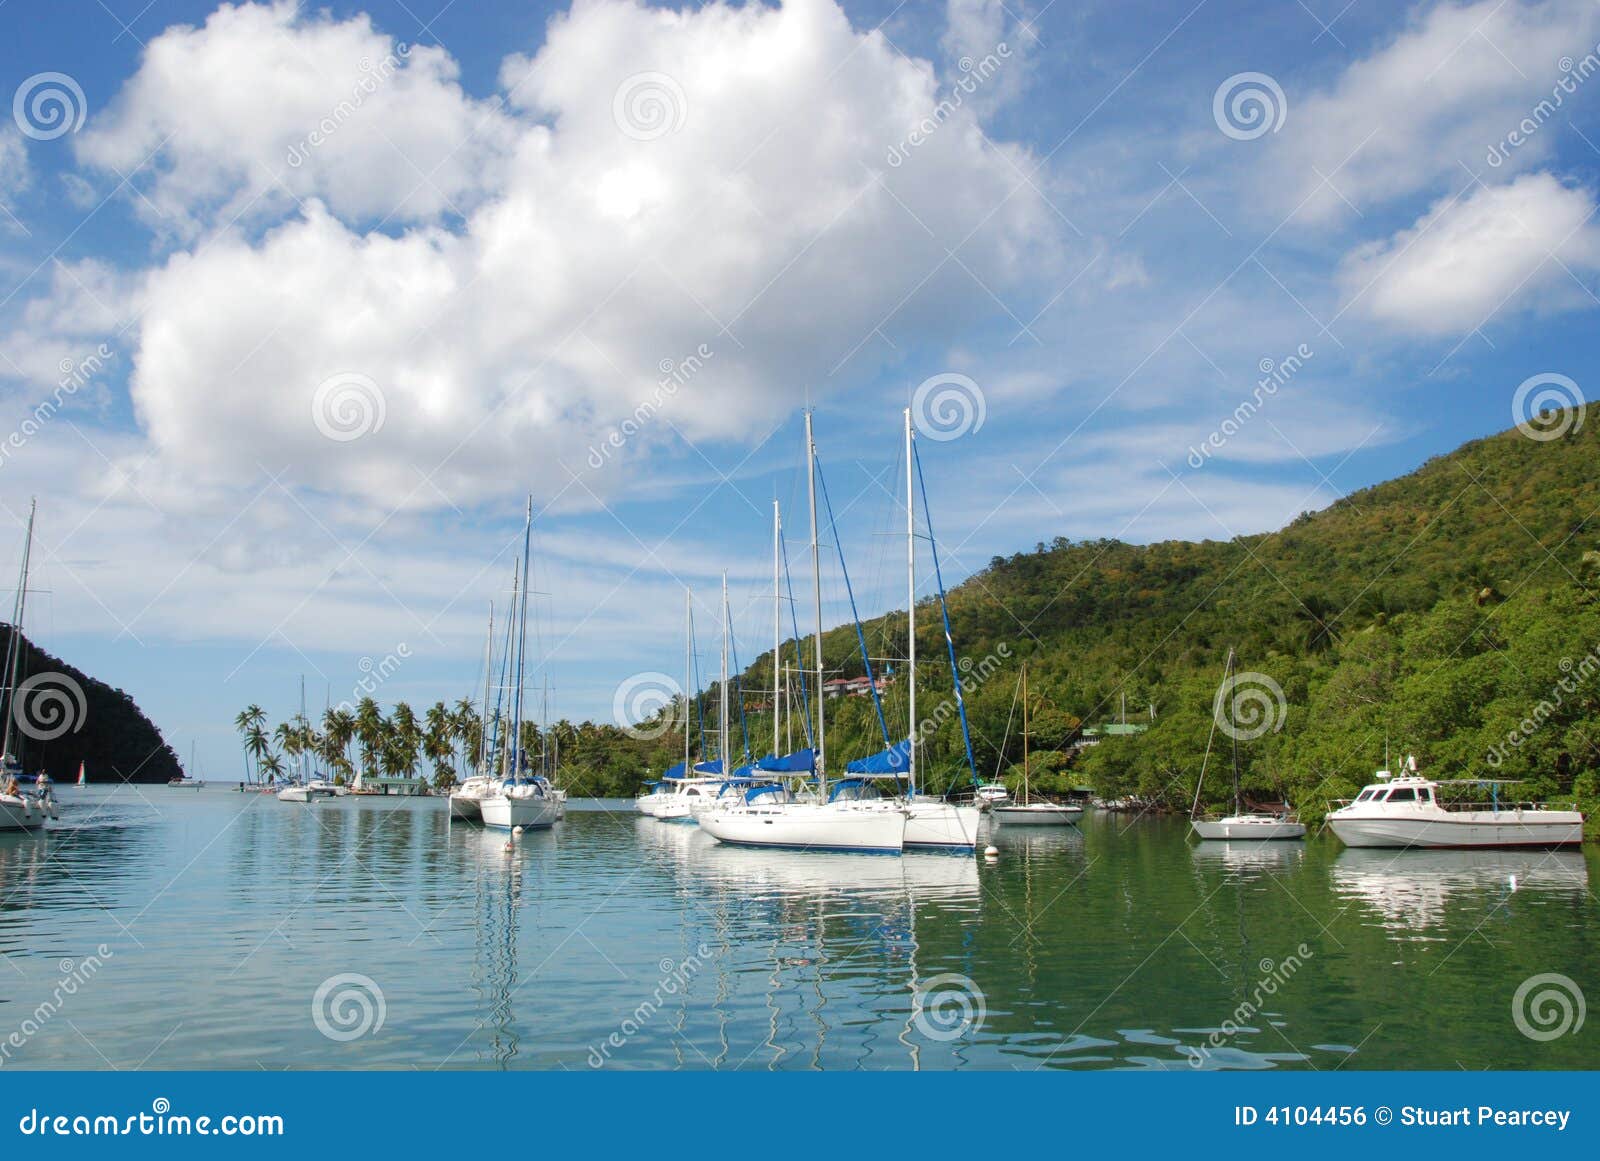 sailboats in tropical harbor